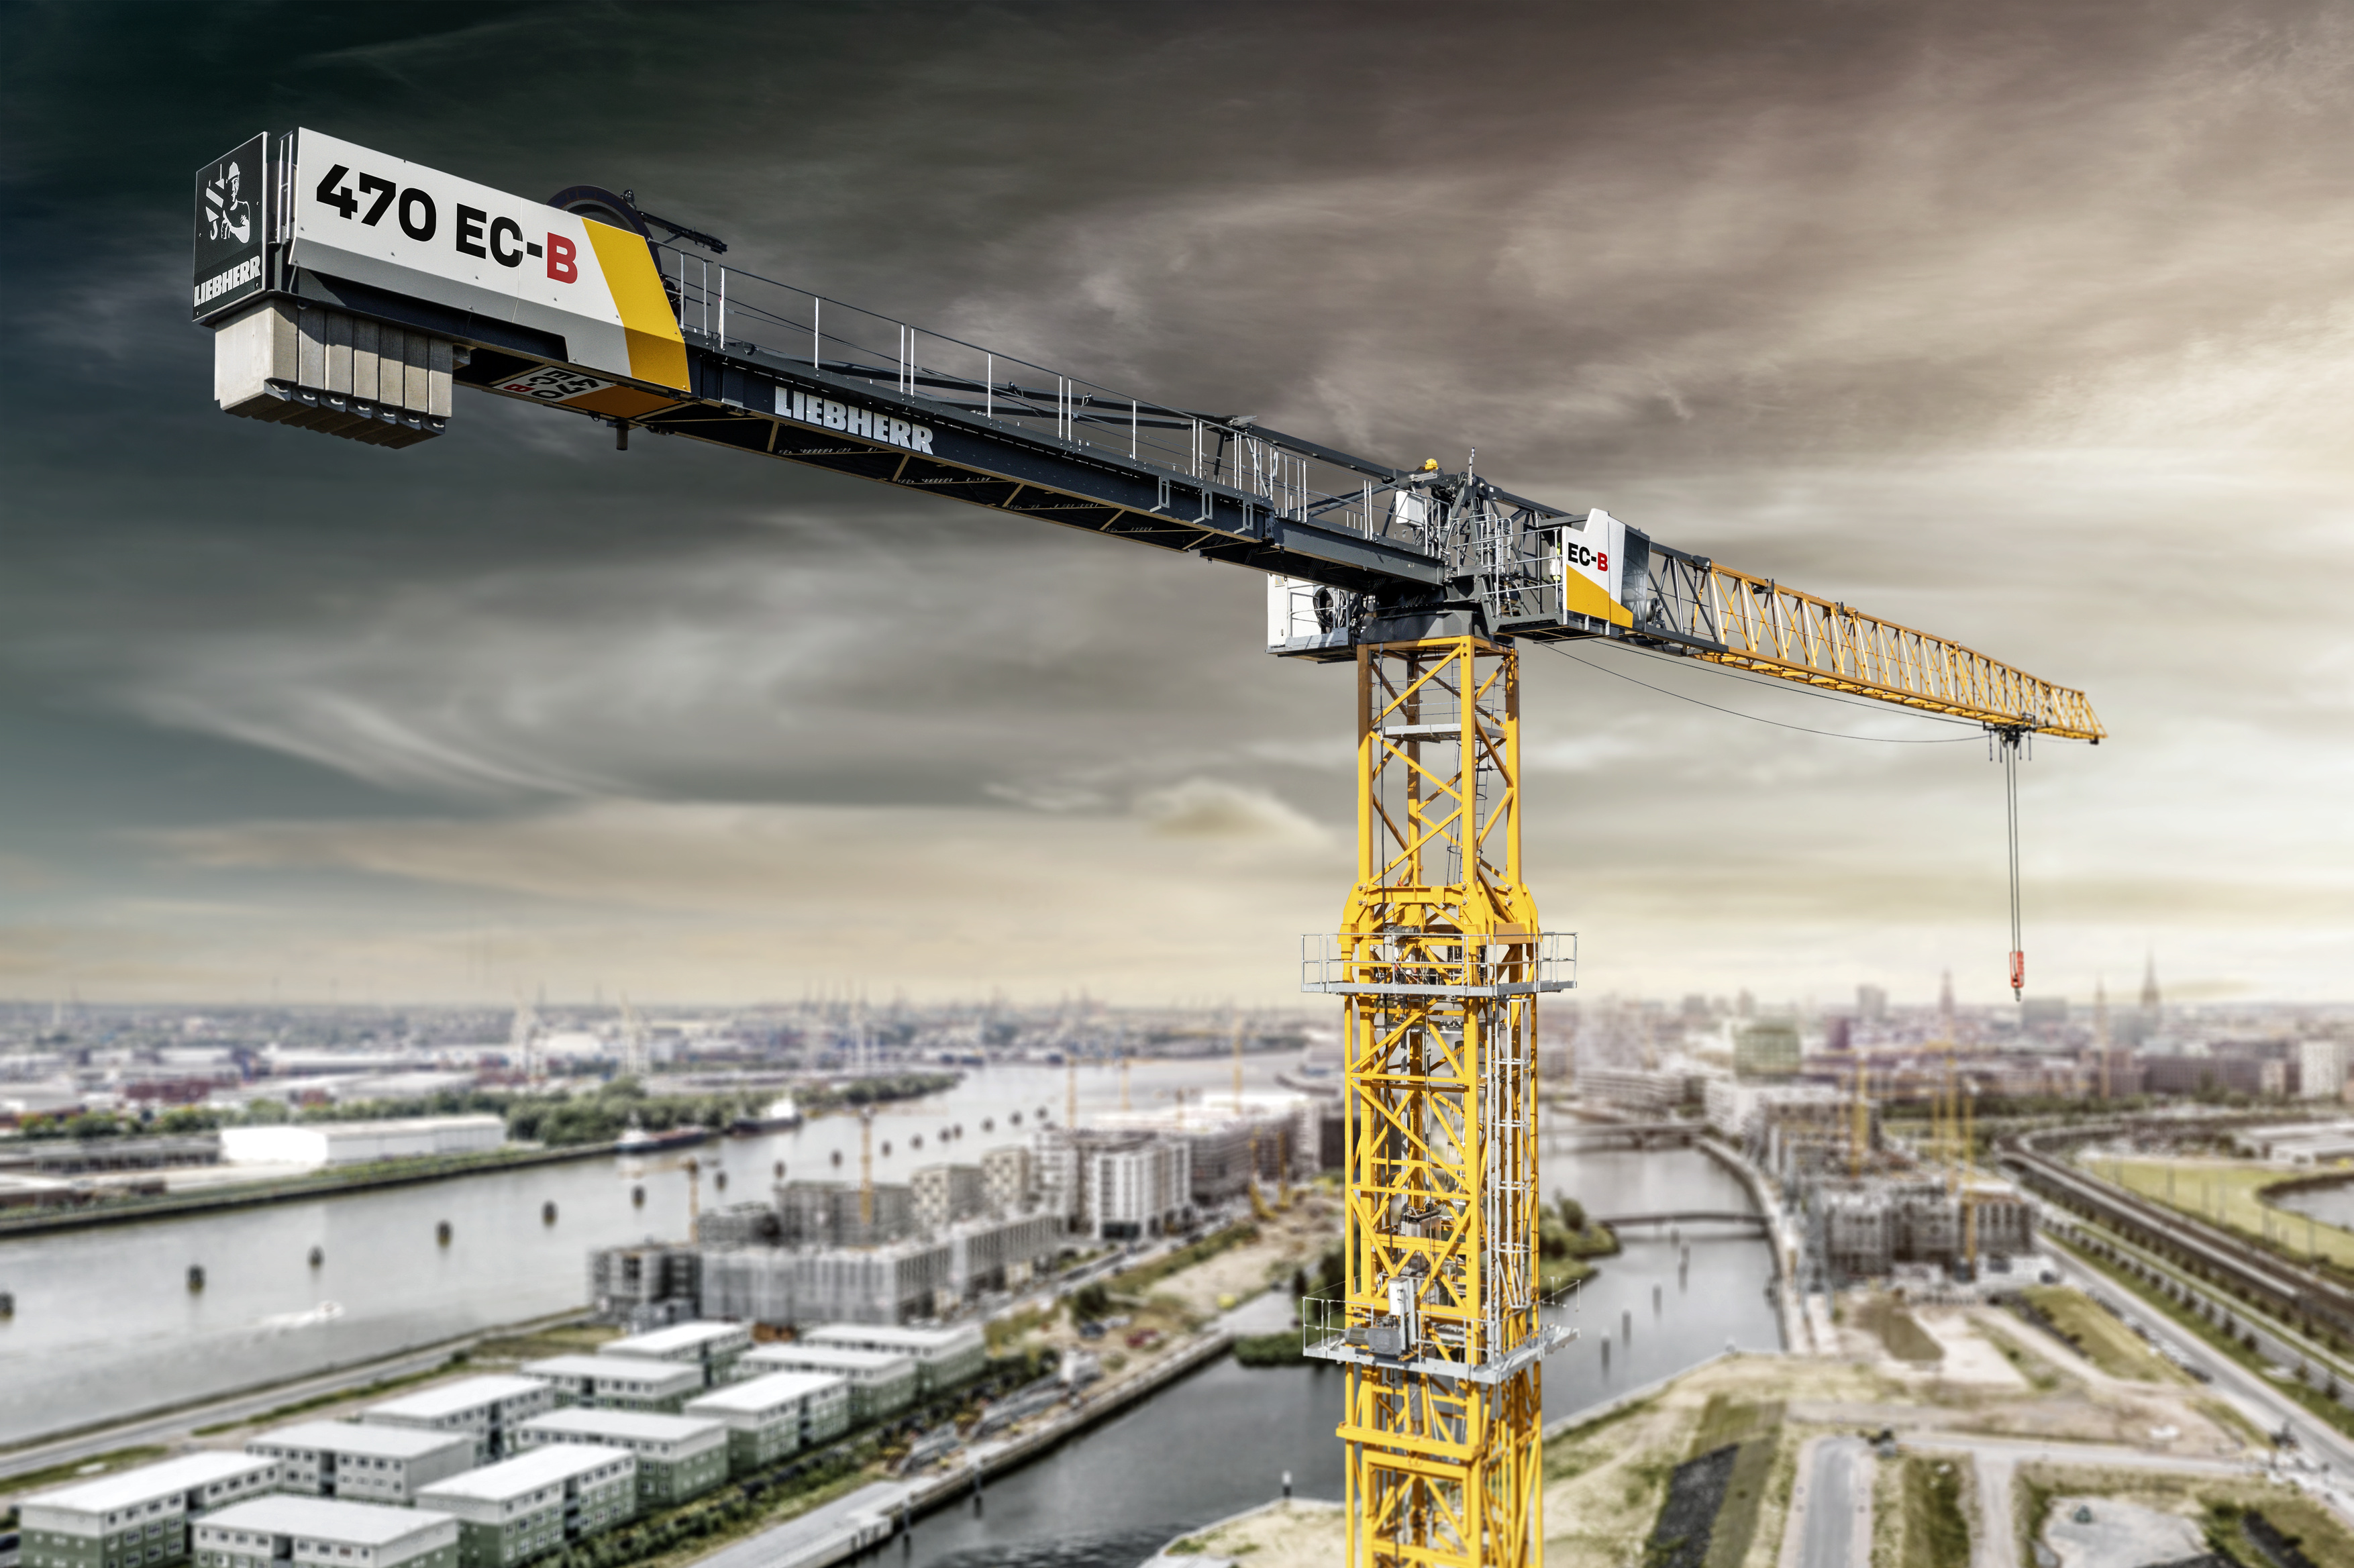 high-lifting-capacities-the-new-liebherr-470-ec-b-crane-is-available